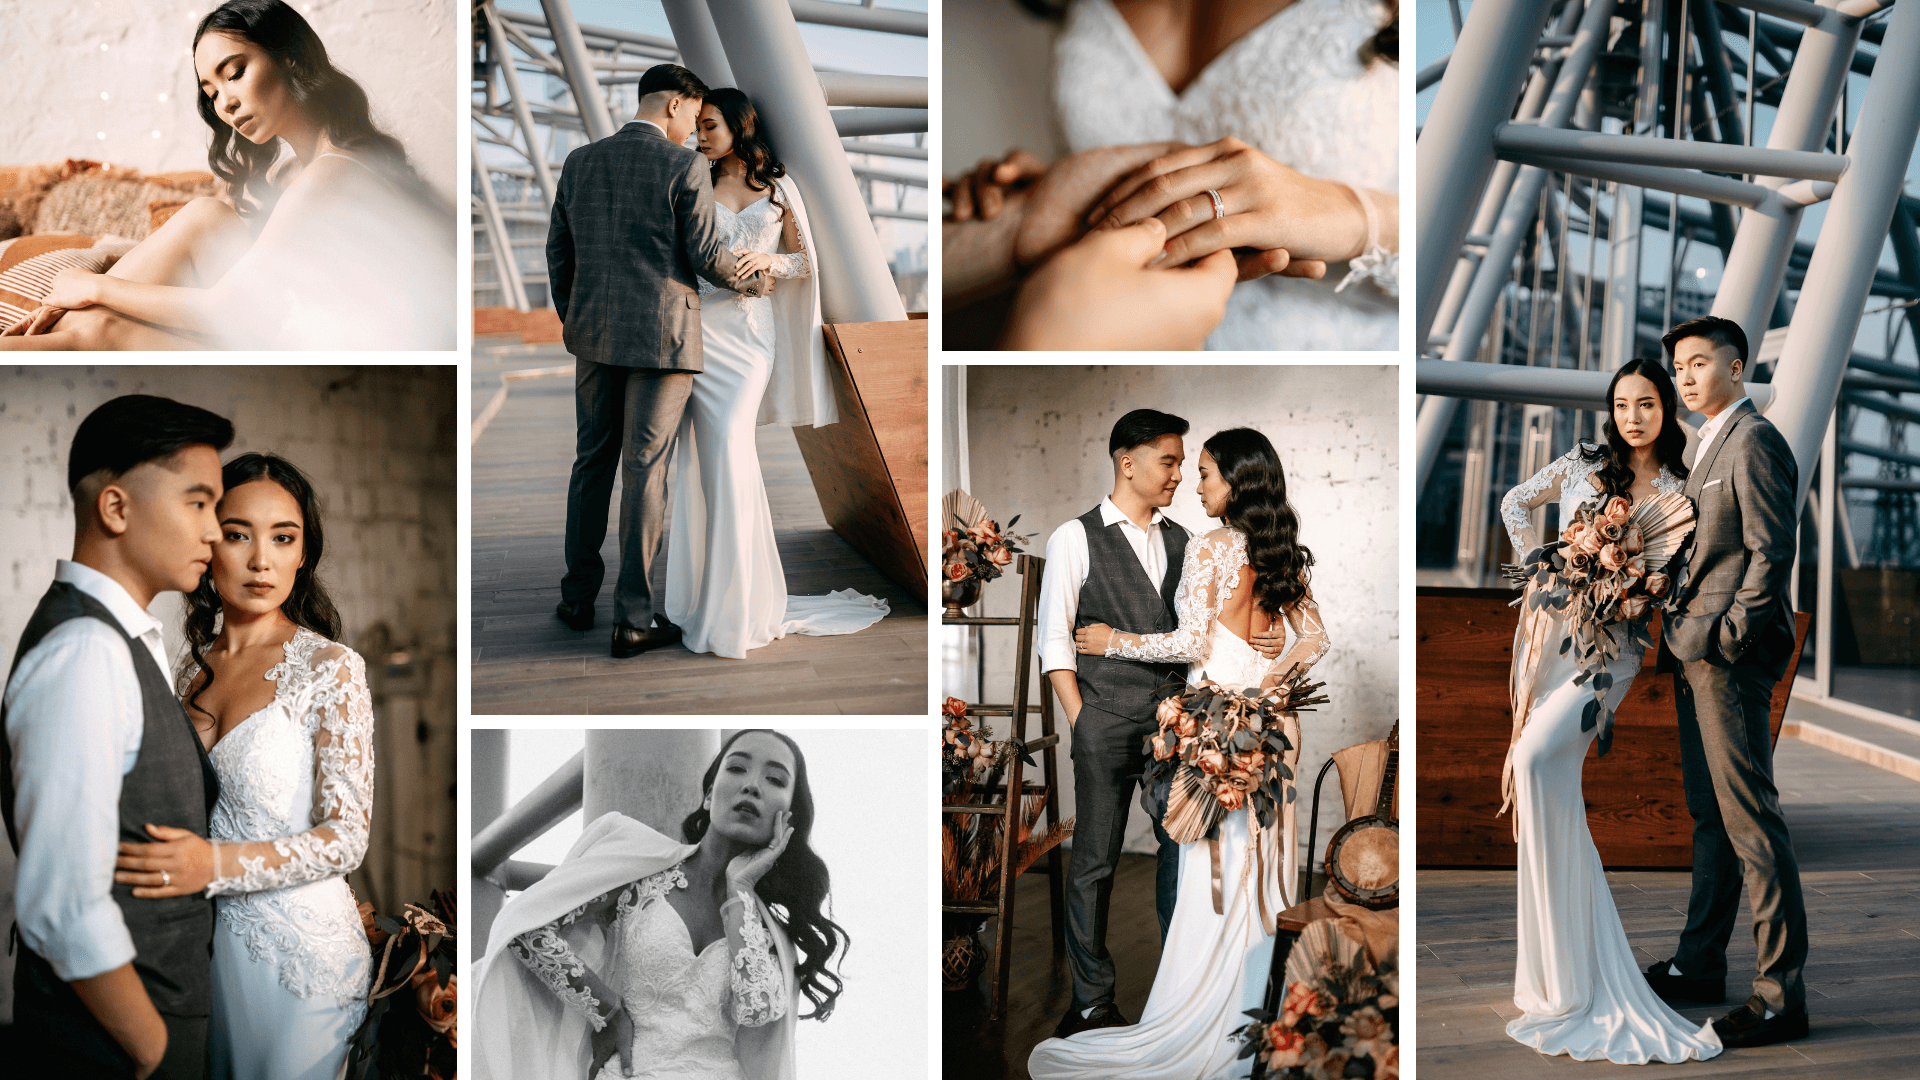 Wedding Photography Packages & Prices